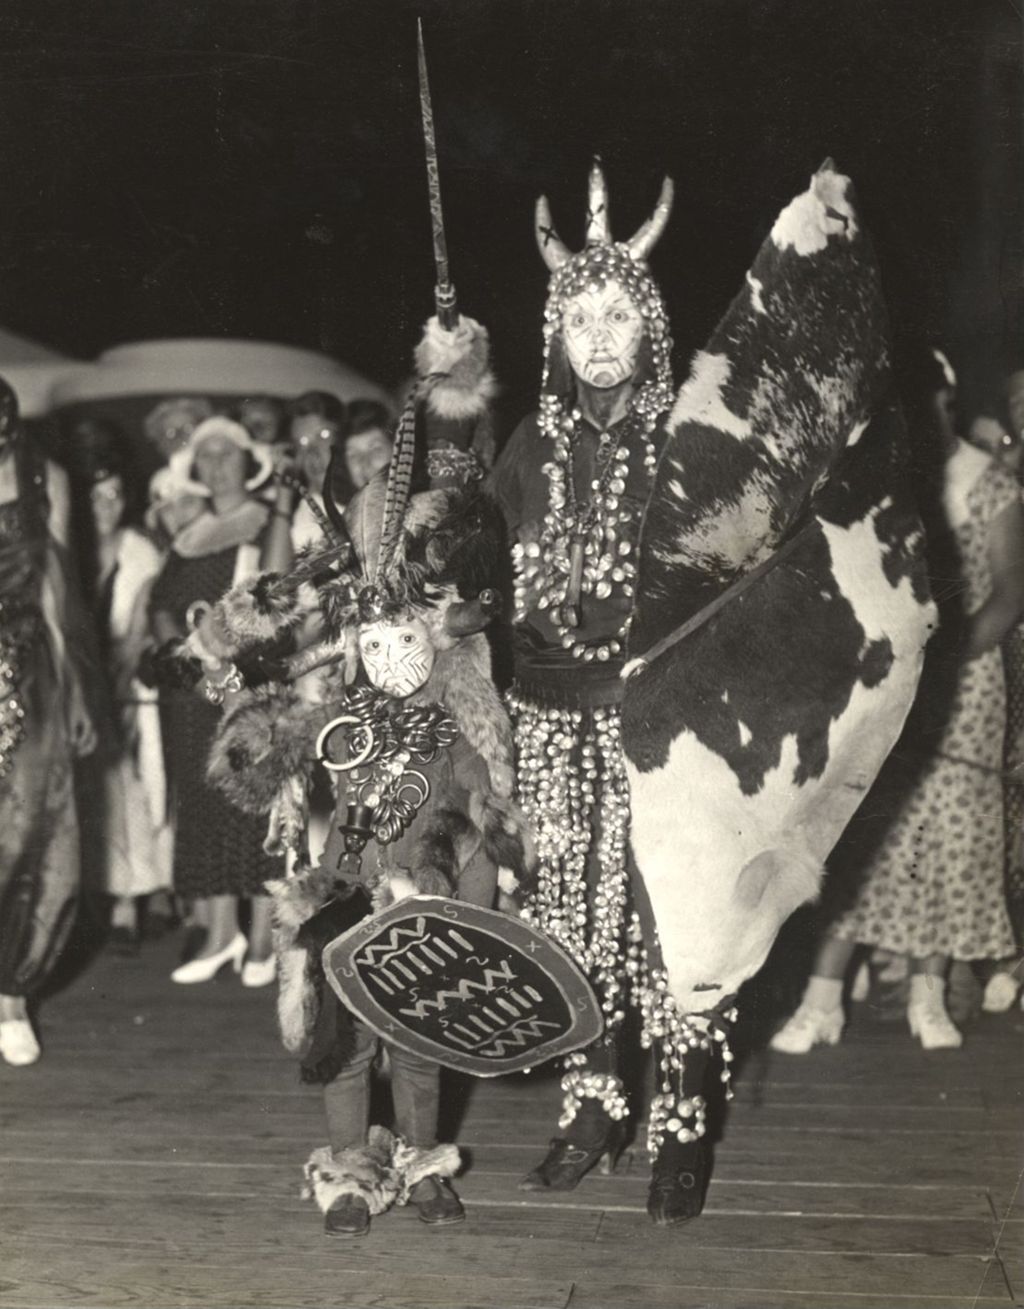 Two of the contestants who entered in the 'Parade of the Masques' contest